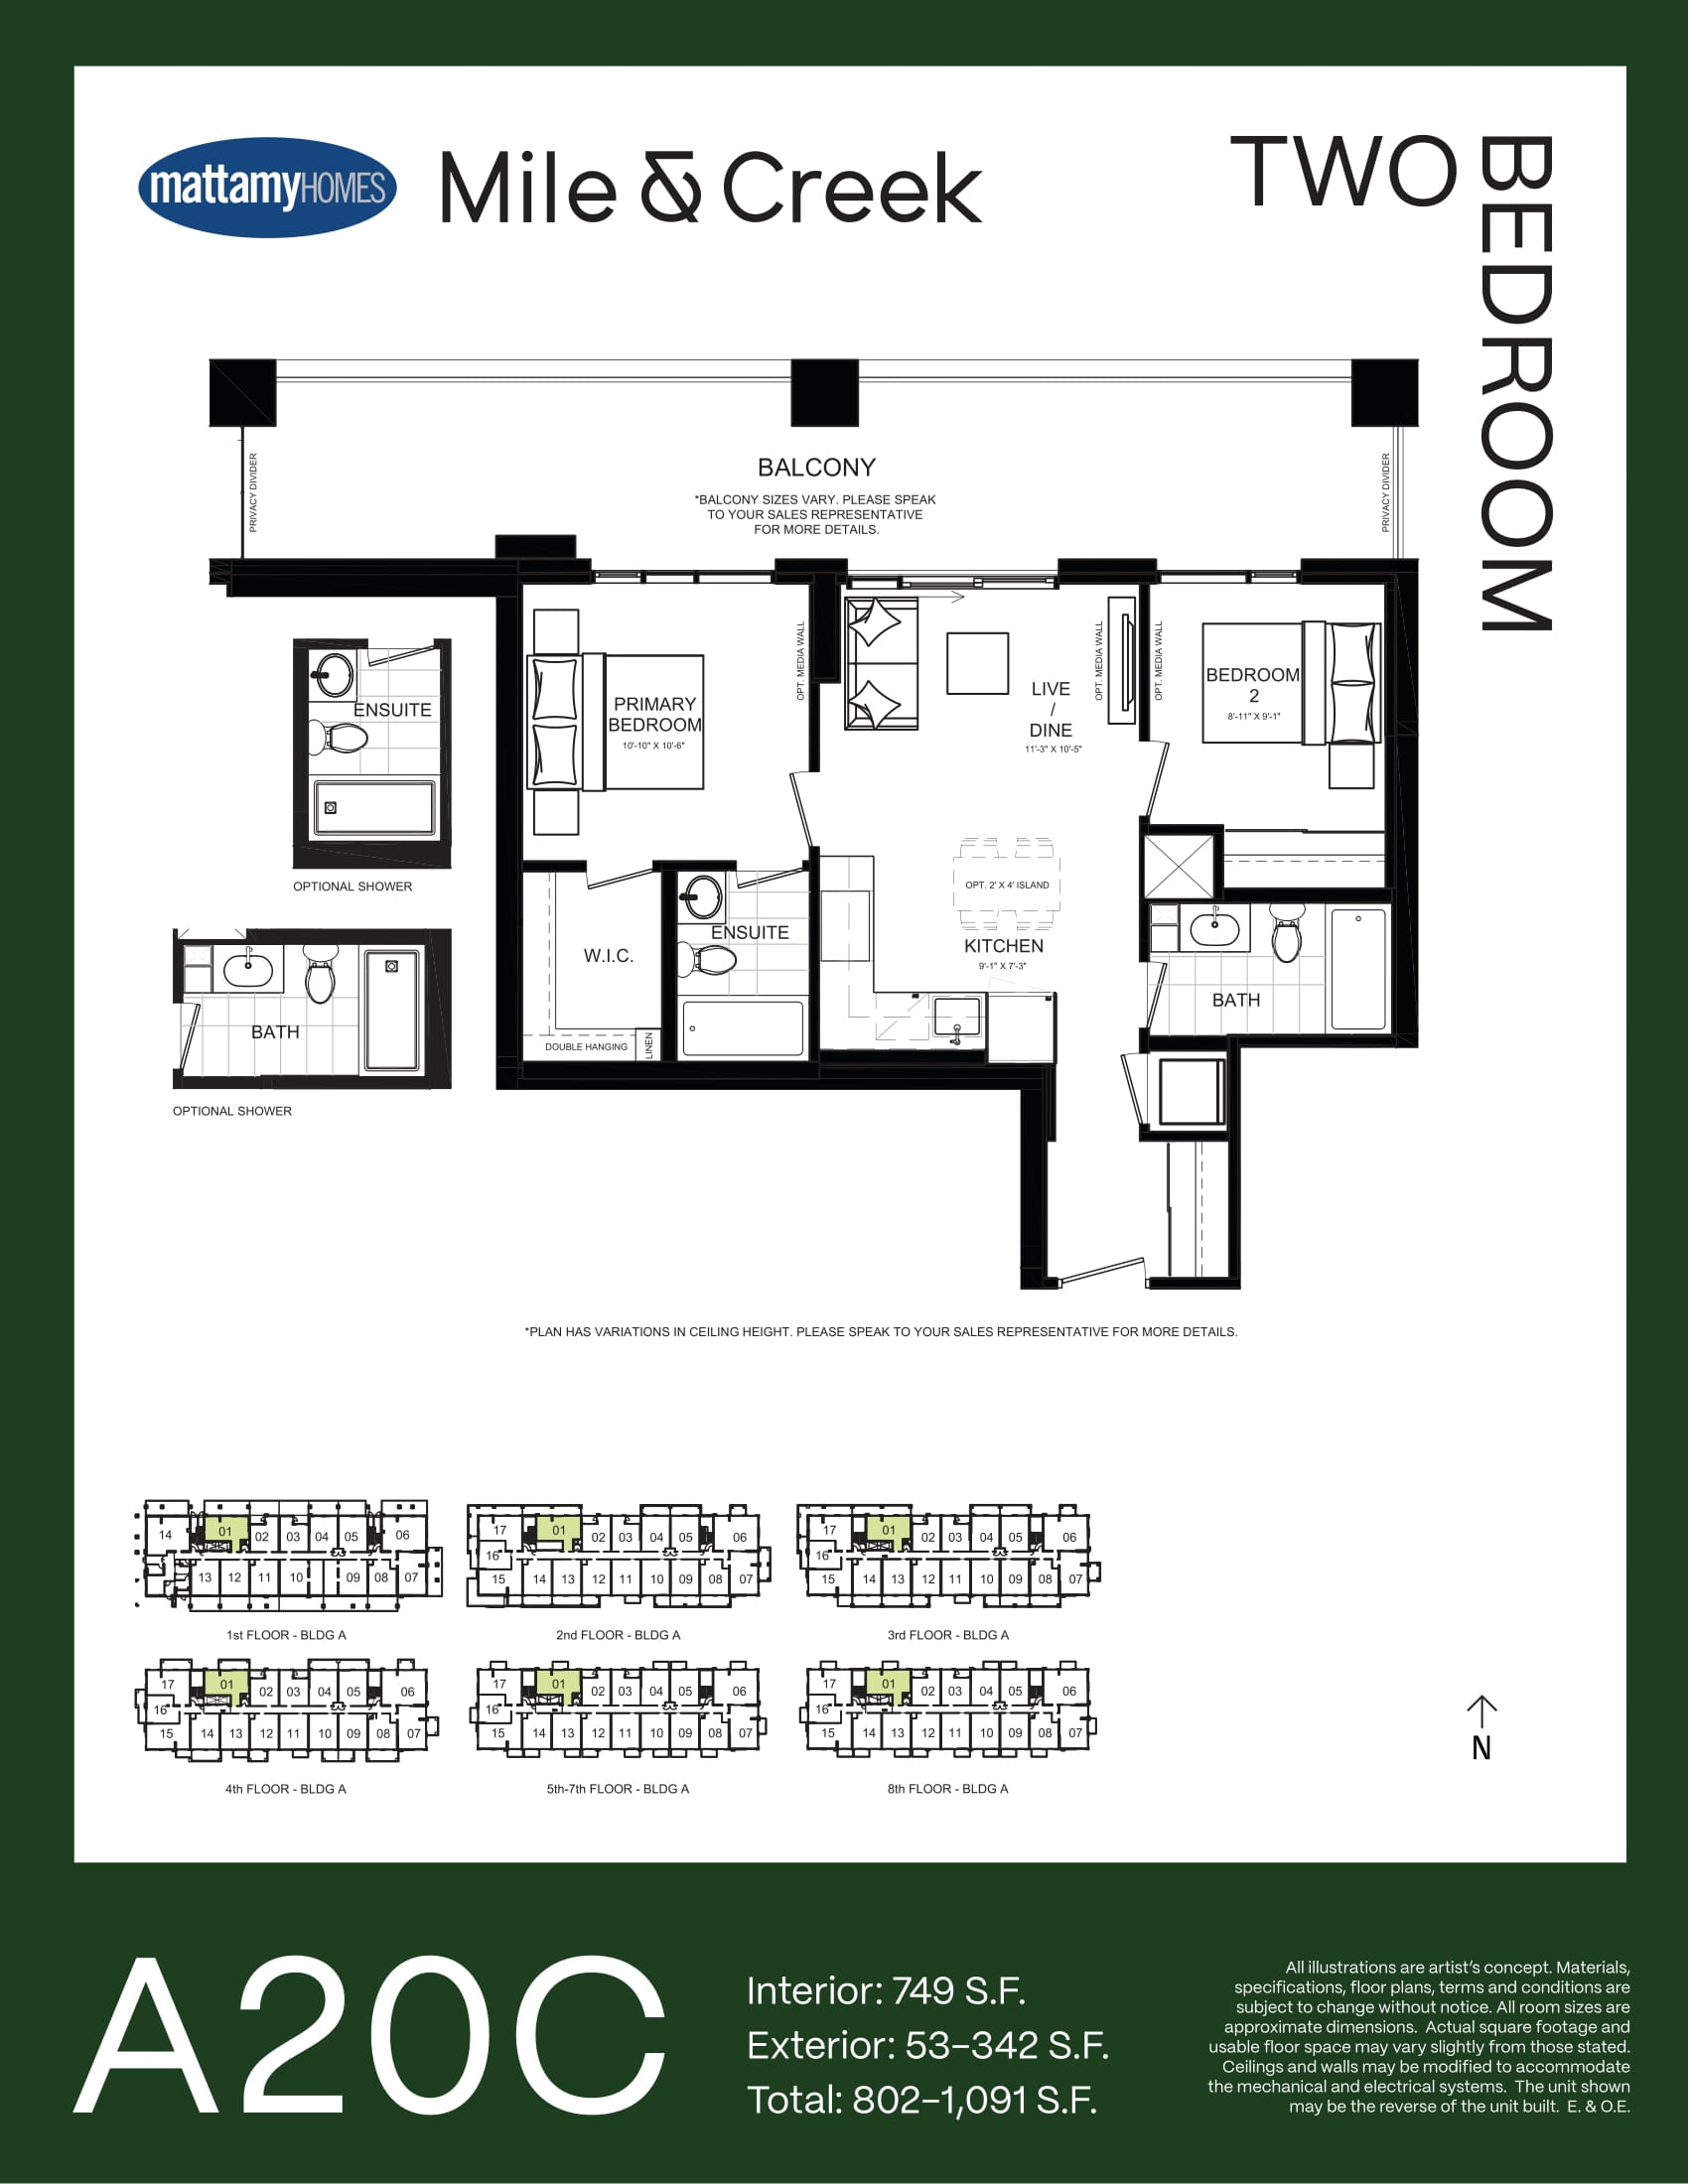  Floor Plan of Mile and Creek Condos with undefined beds